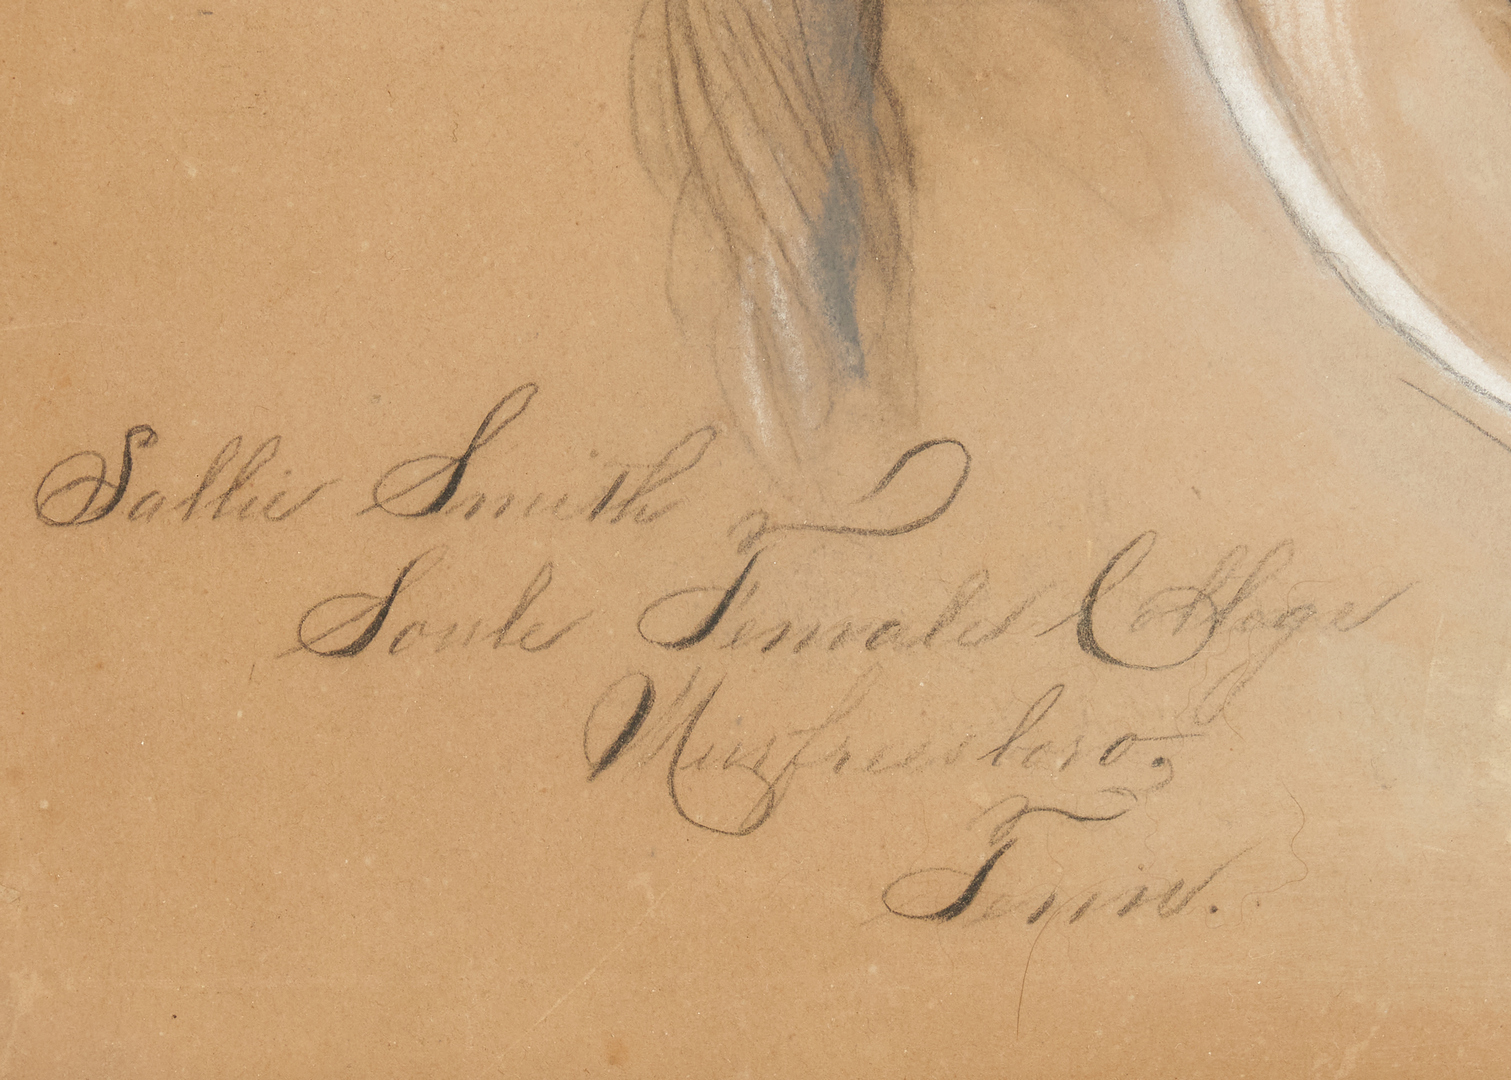 Lot 161: Soule Female College, TN Drawing of Two Children, 19th c.